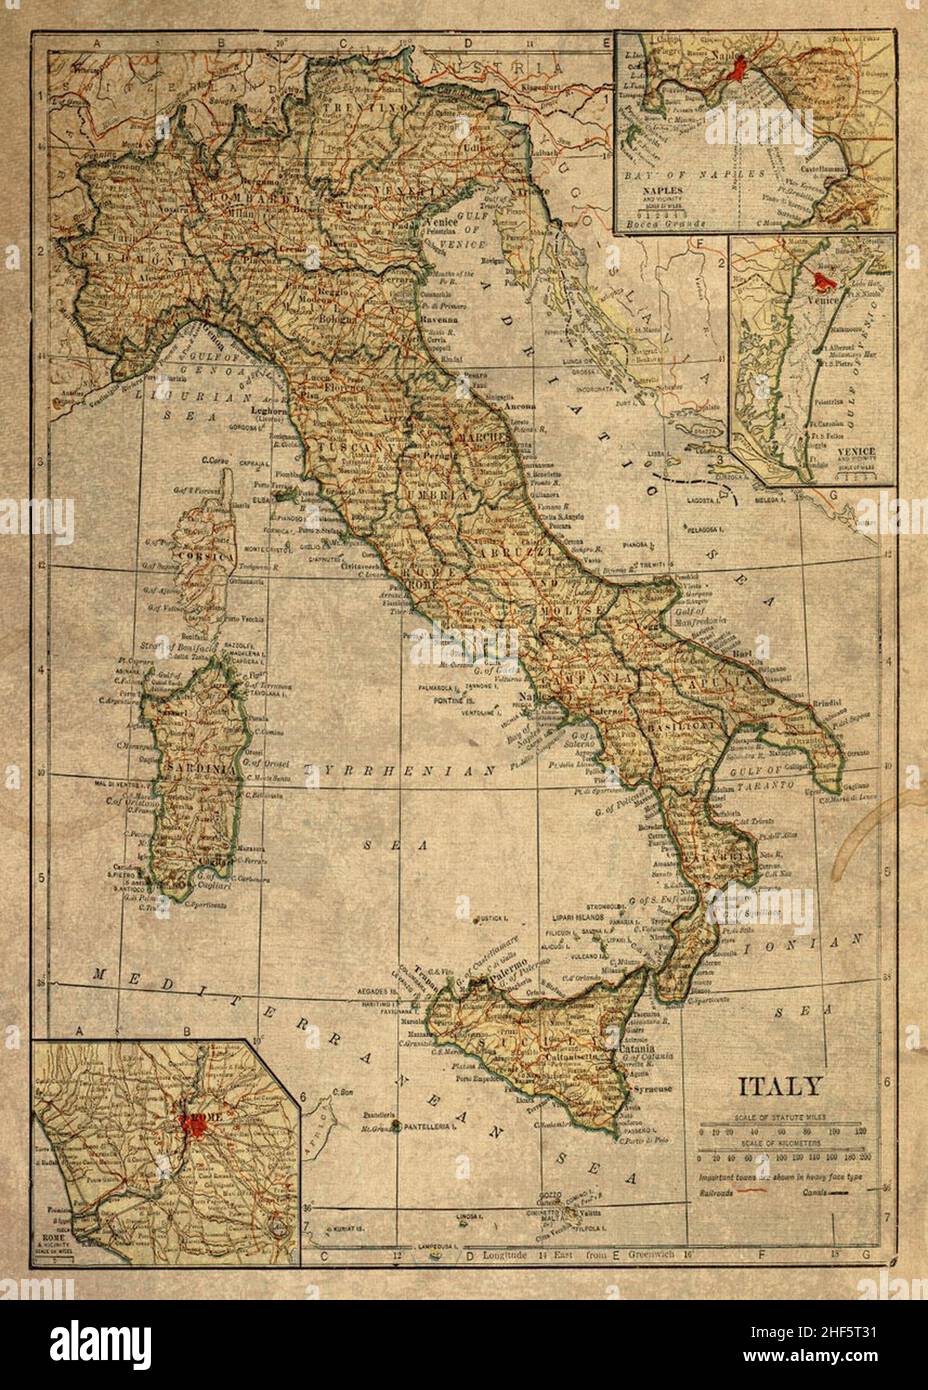 map of Italy vintage Stock Photo